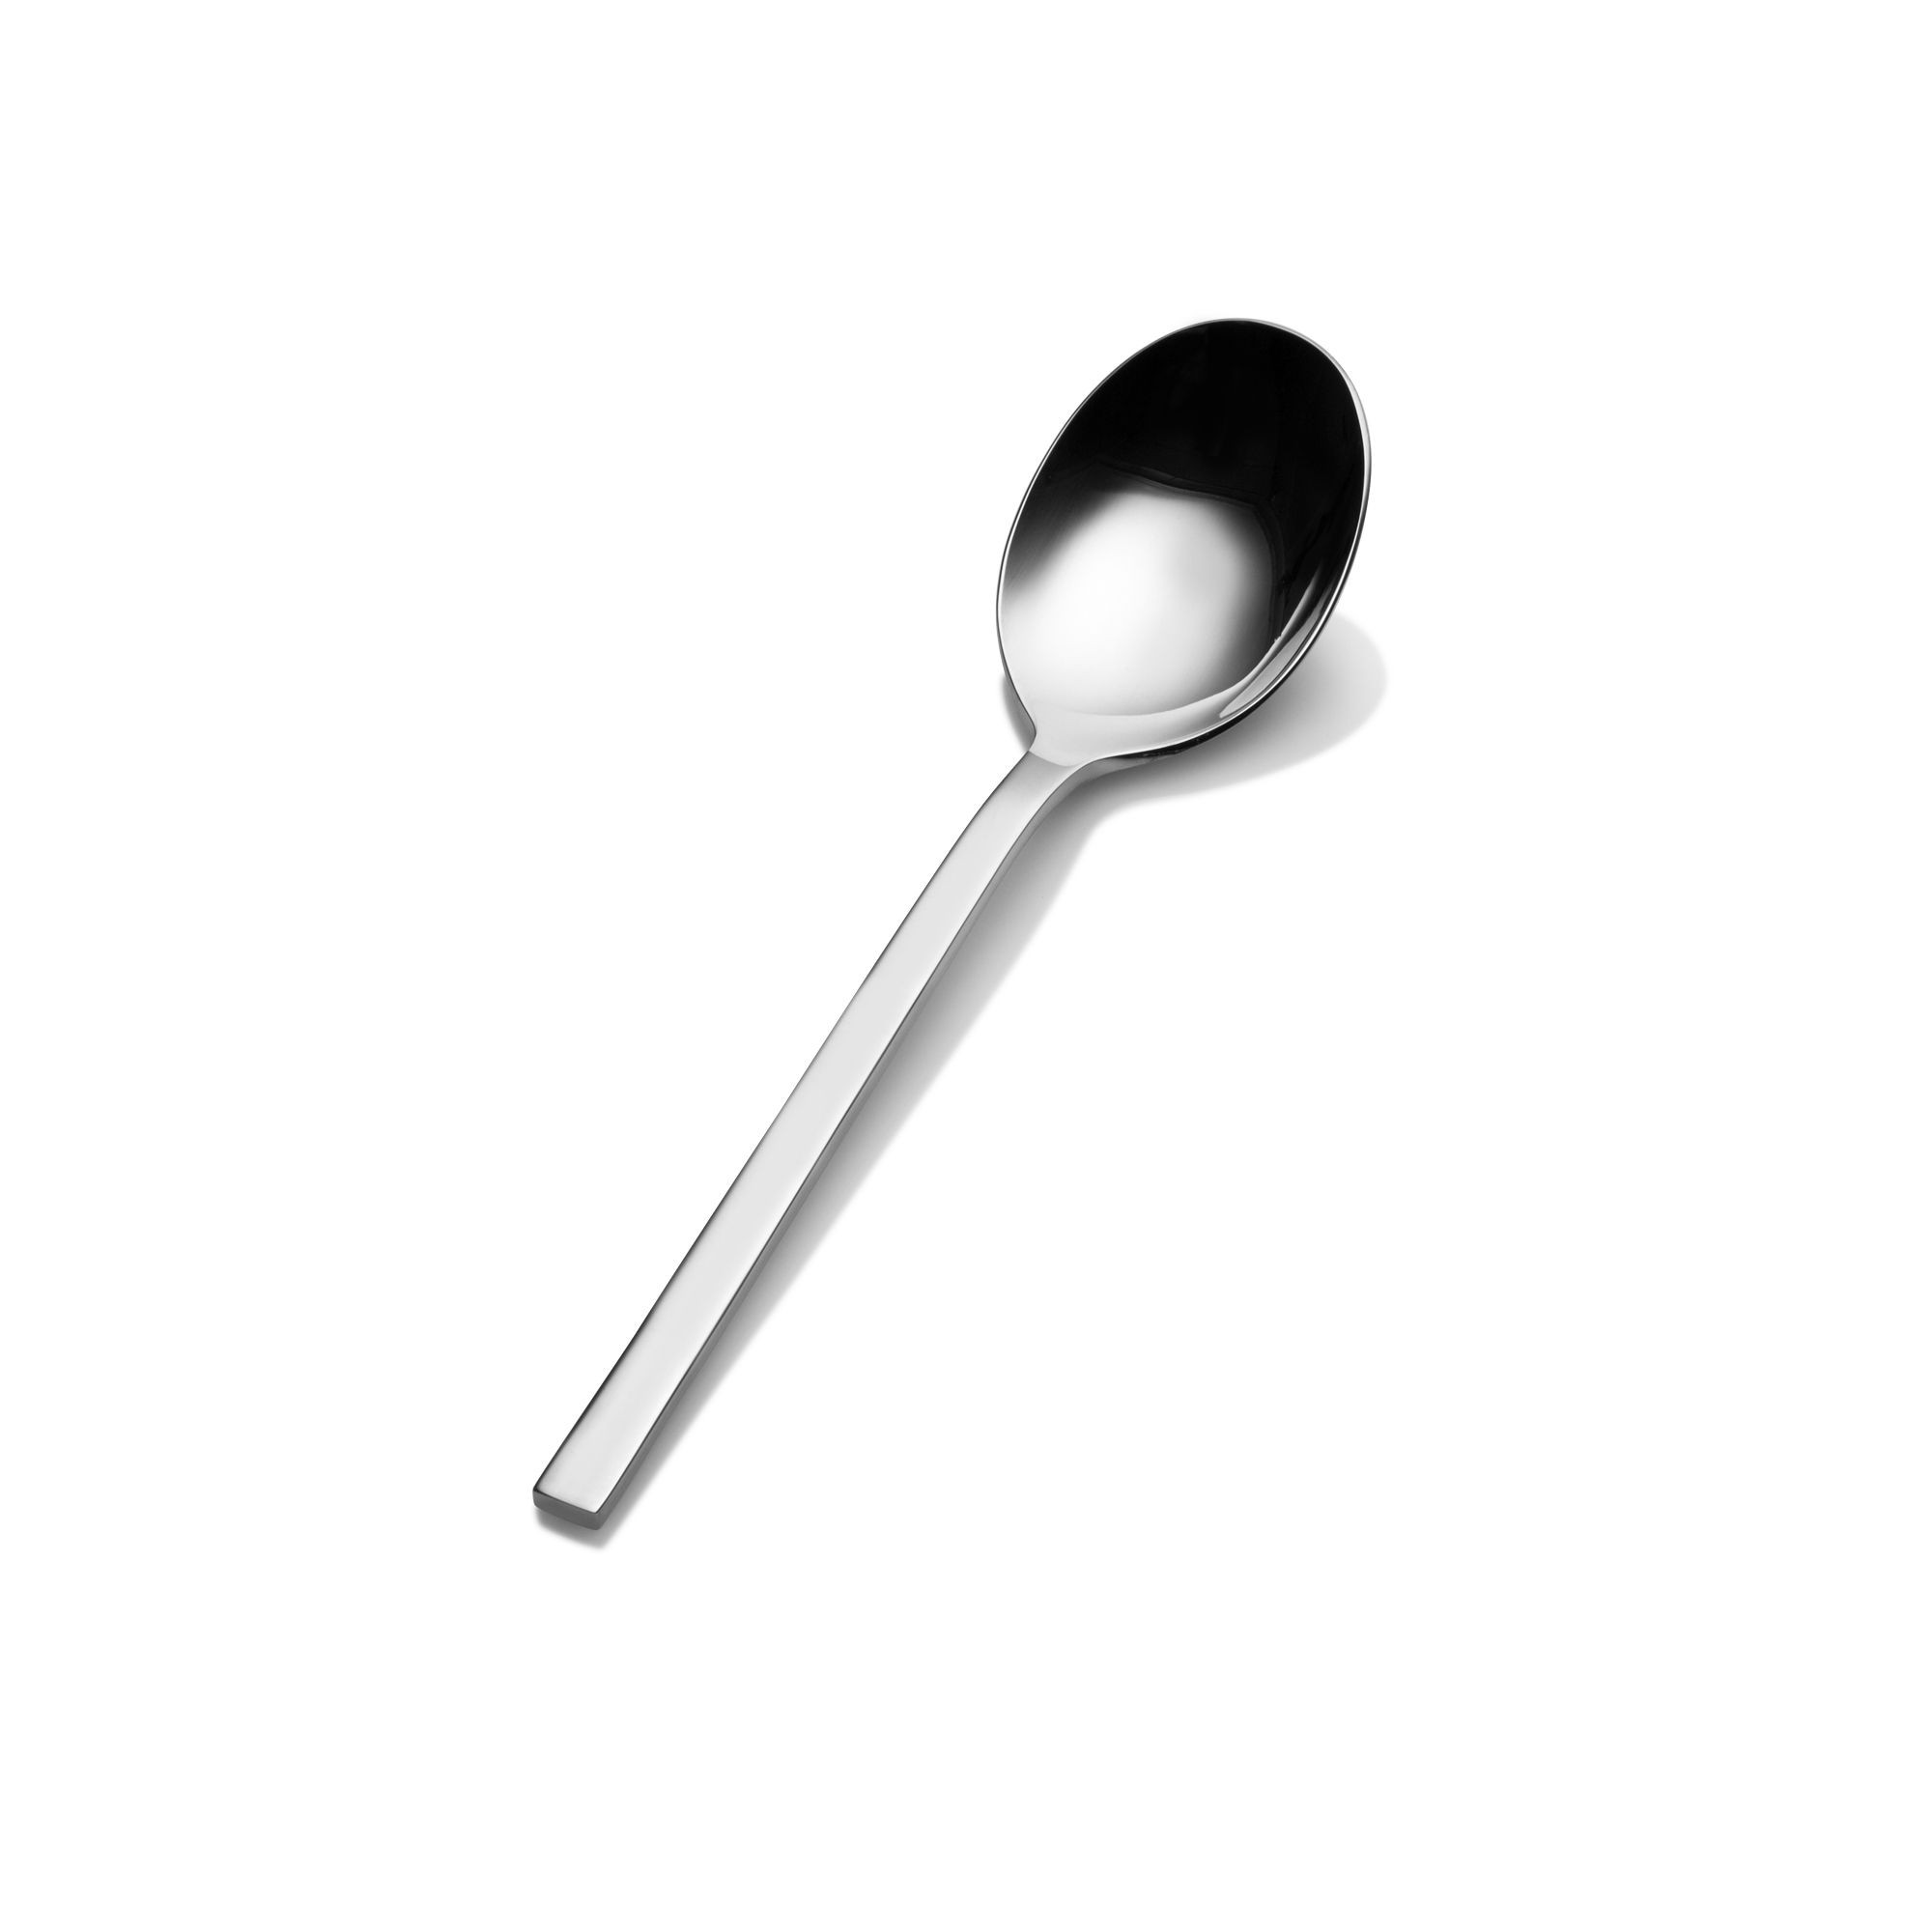 Bon Chef S3803 Milan 18/8 Stainless Steel Soup and Dessert Spoon